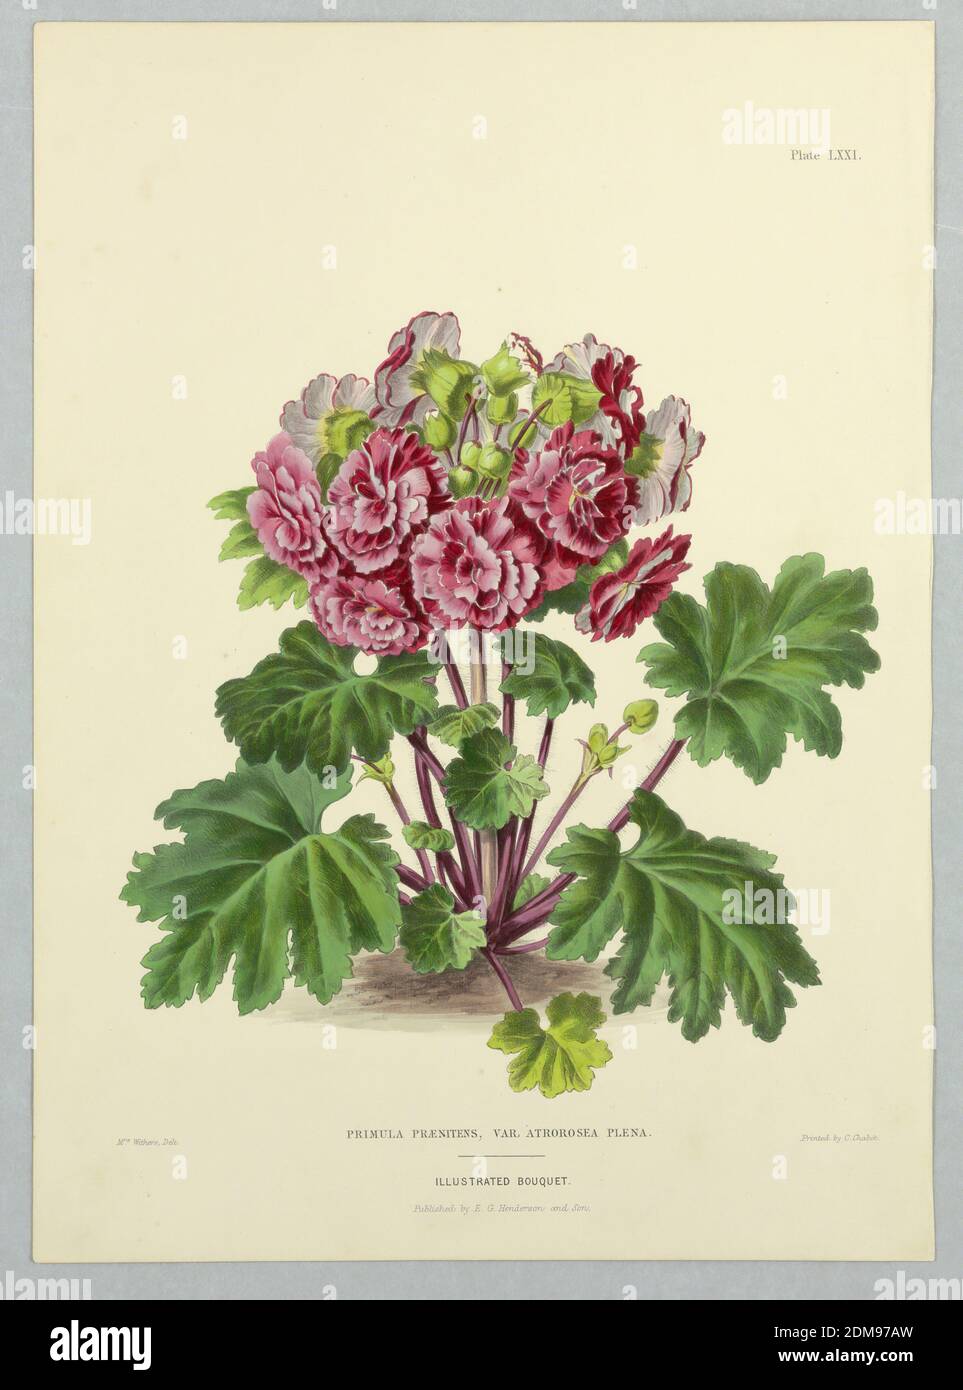 Primula Praenitens, Var. Atrorosea Plena, Plate LXII from Edward George Henderson's 'The Illustrated Bouquet', E. G. Henderson and Son, English, ca. 1859 - 1886, Mrs. Withers, English, active 19th c., Chromolithograph on paper, Primula Praenitens, Var. Atrorosea Plena, Plate LXII from Edward George Henderson's 'The Illustrated Bouquet.', London, England, ca. 1857–1864, Print Stock Photo